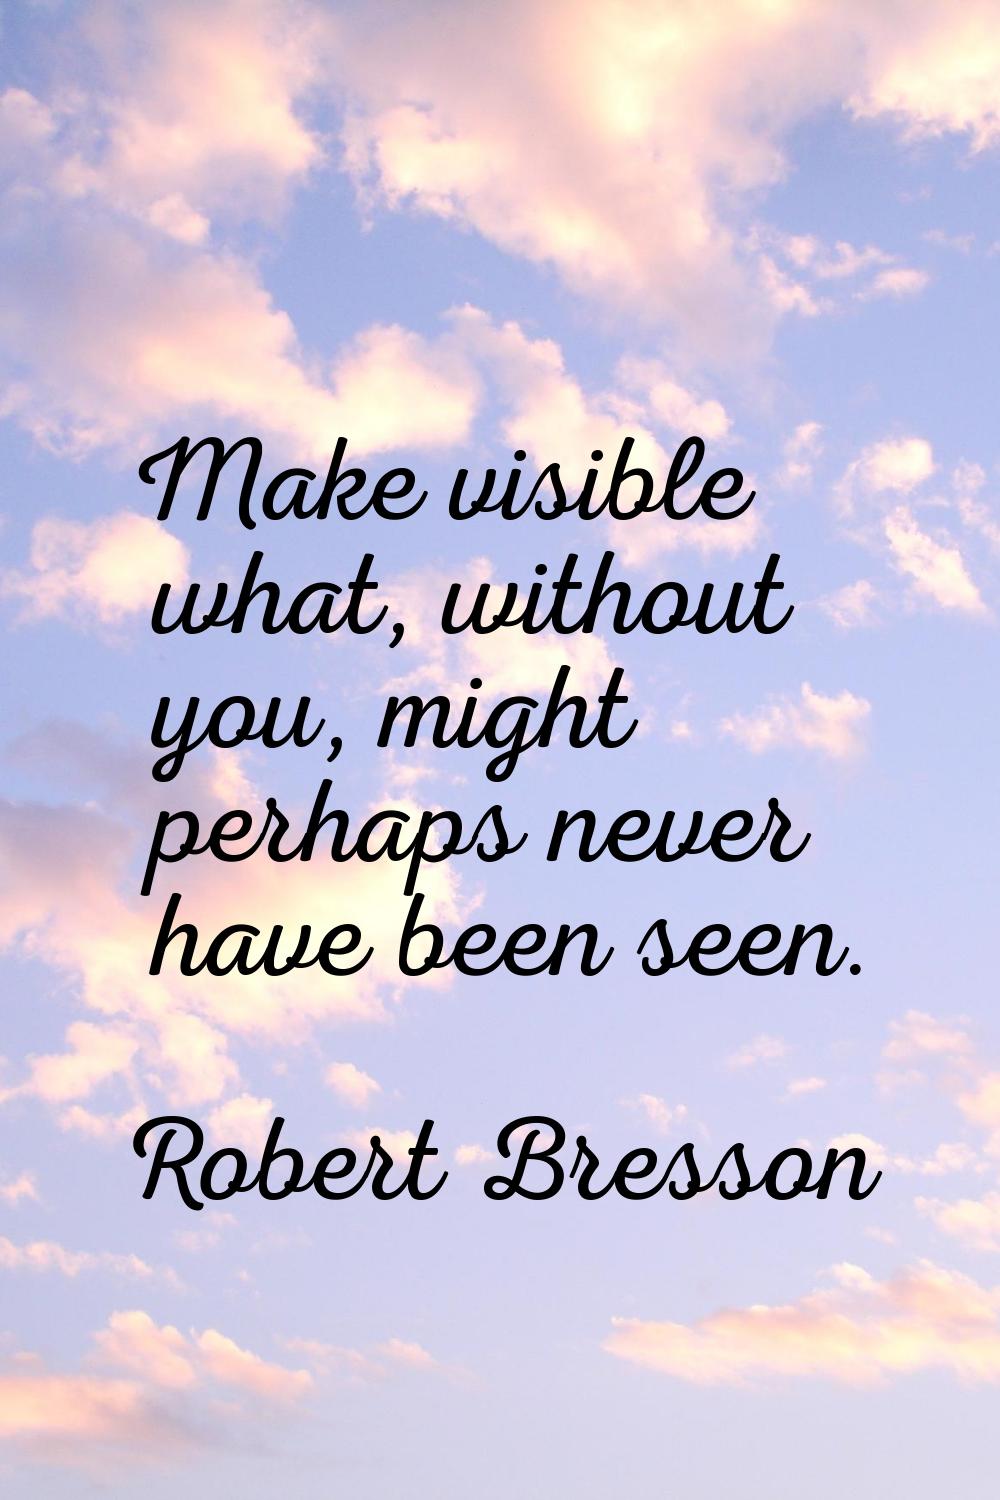 Make visible what, without you, might perhaps never have been seen.